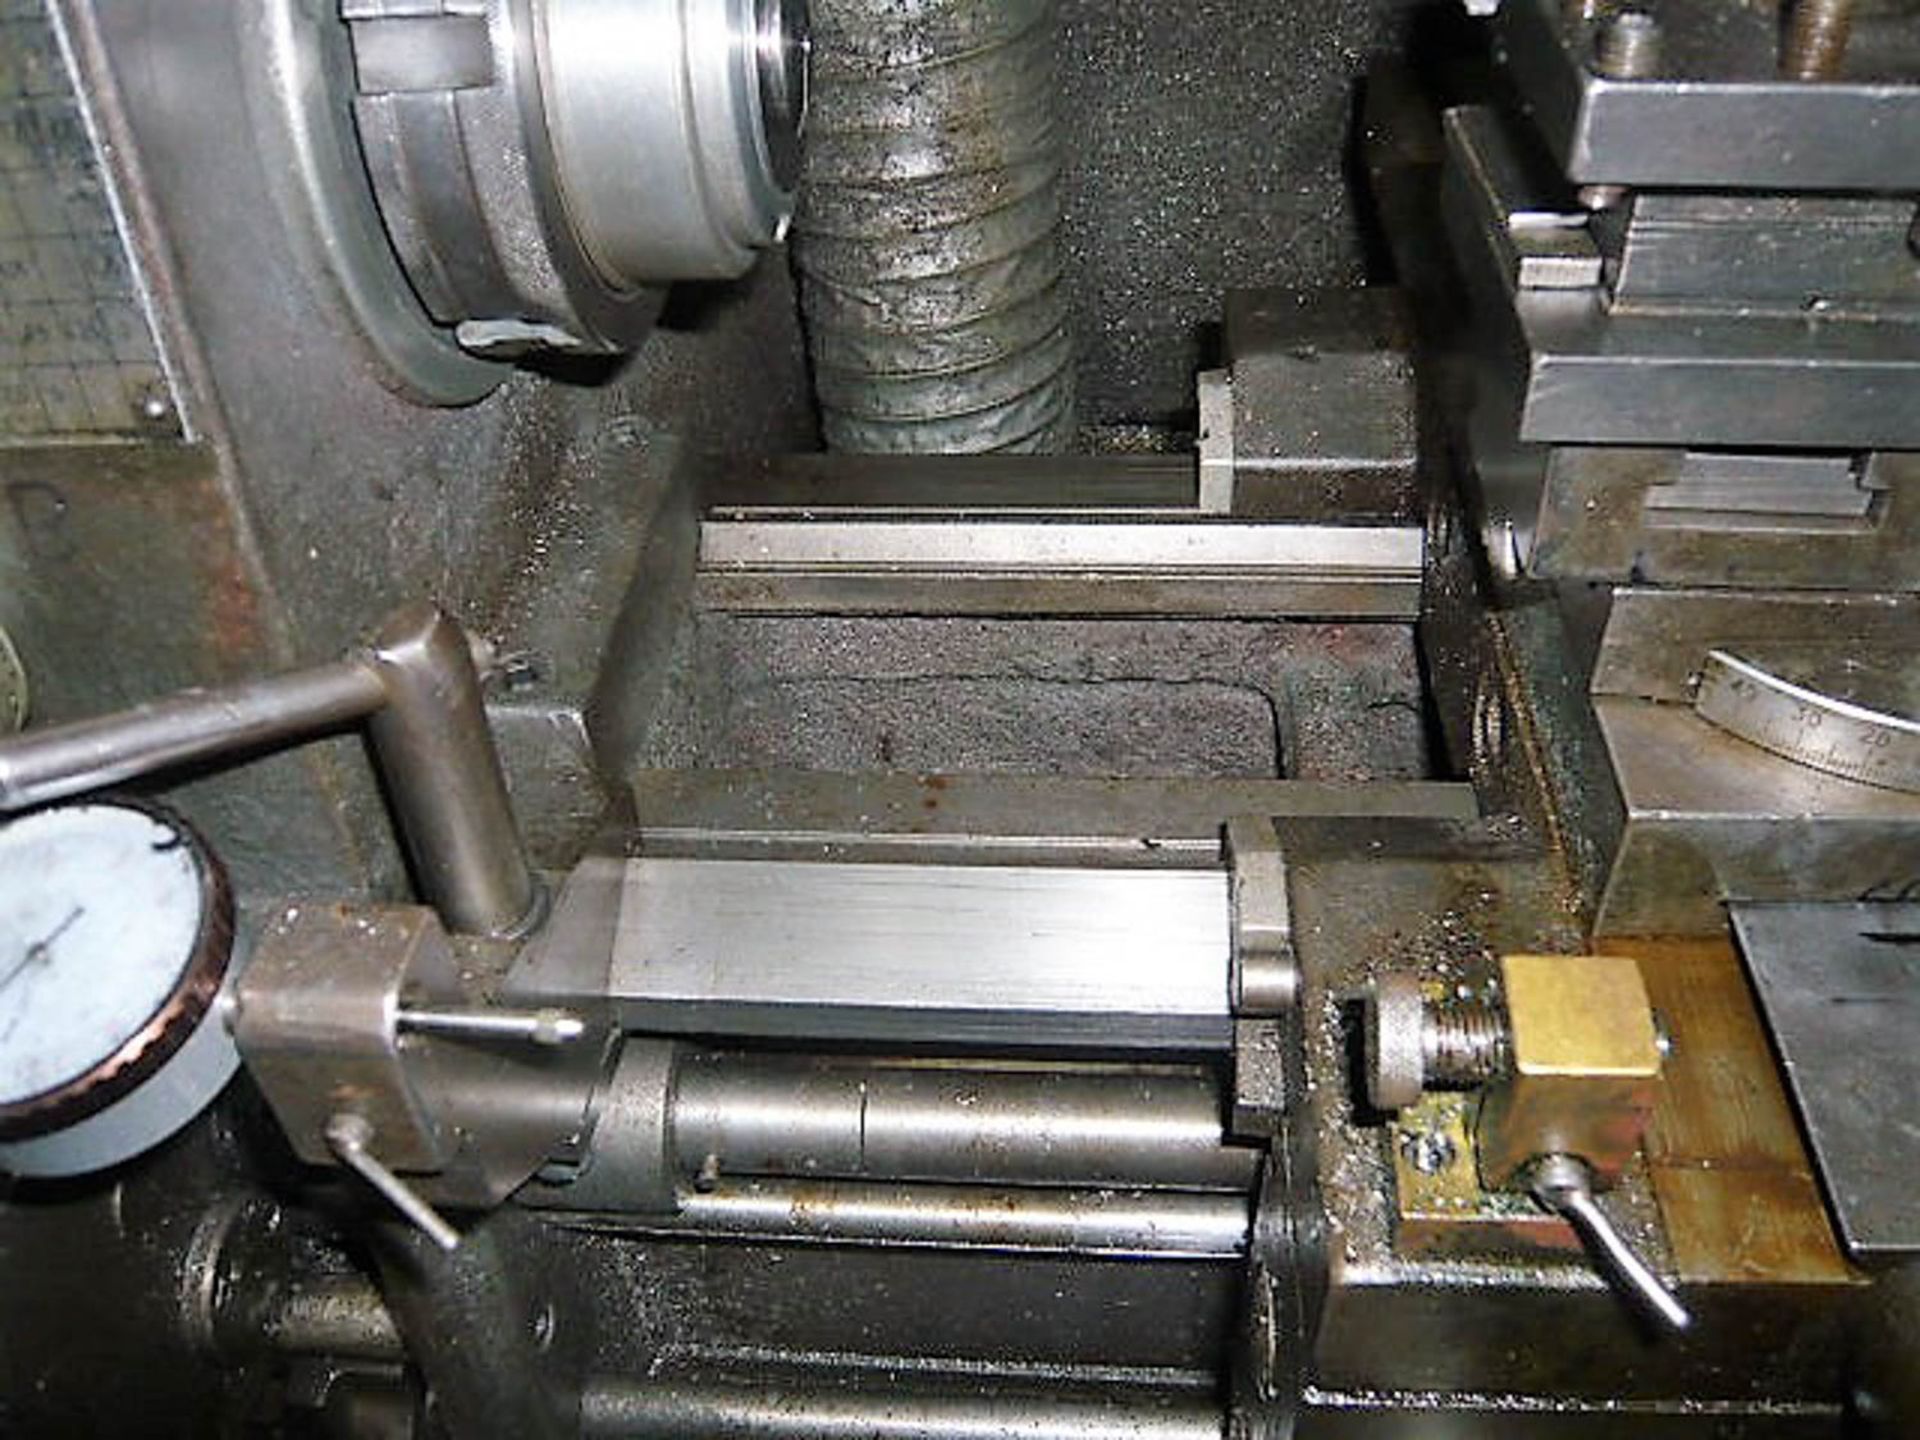 MADE IN BELGIUM 12" X 20" LATHE, INCH / METRIC THREADING, TOOL POST, 5C COLLET CHUCK, 6" 3-JAW - Image 6 of 6